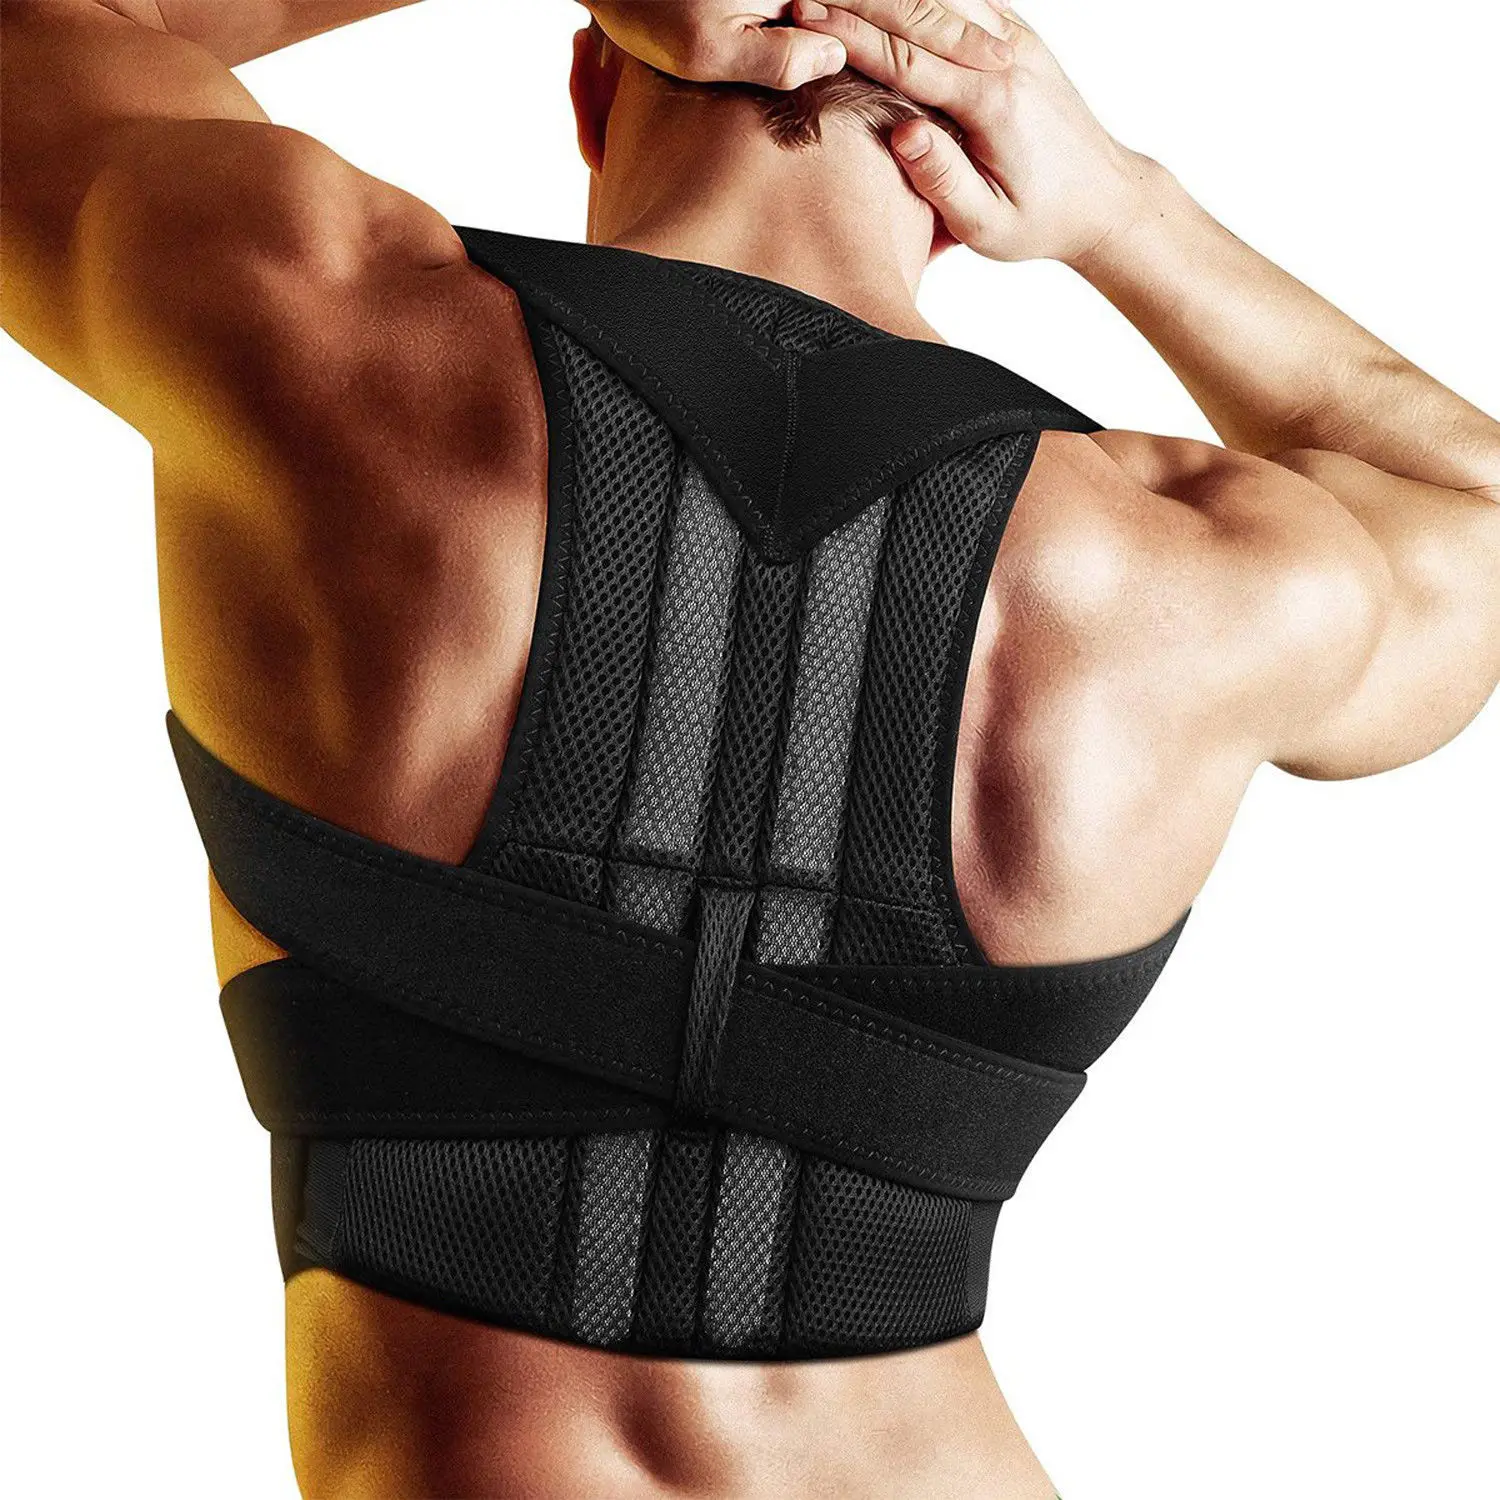 

Straighten Posture Corrector for Back Belt Prevent Slouching Relieve Pain Posture Straps Clavicle Support Brace for Women Men, As shown in the figure